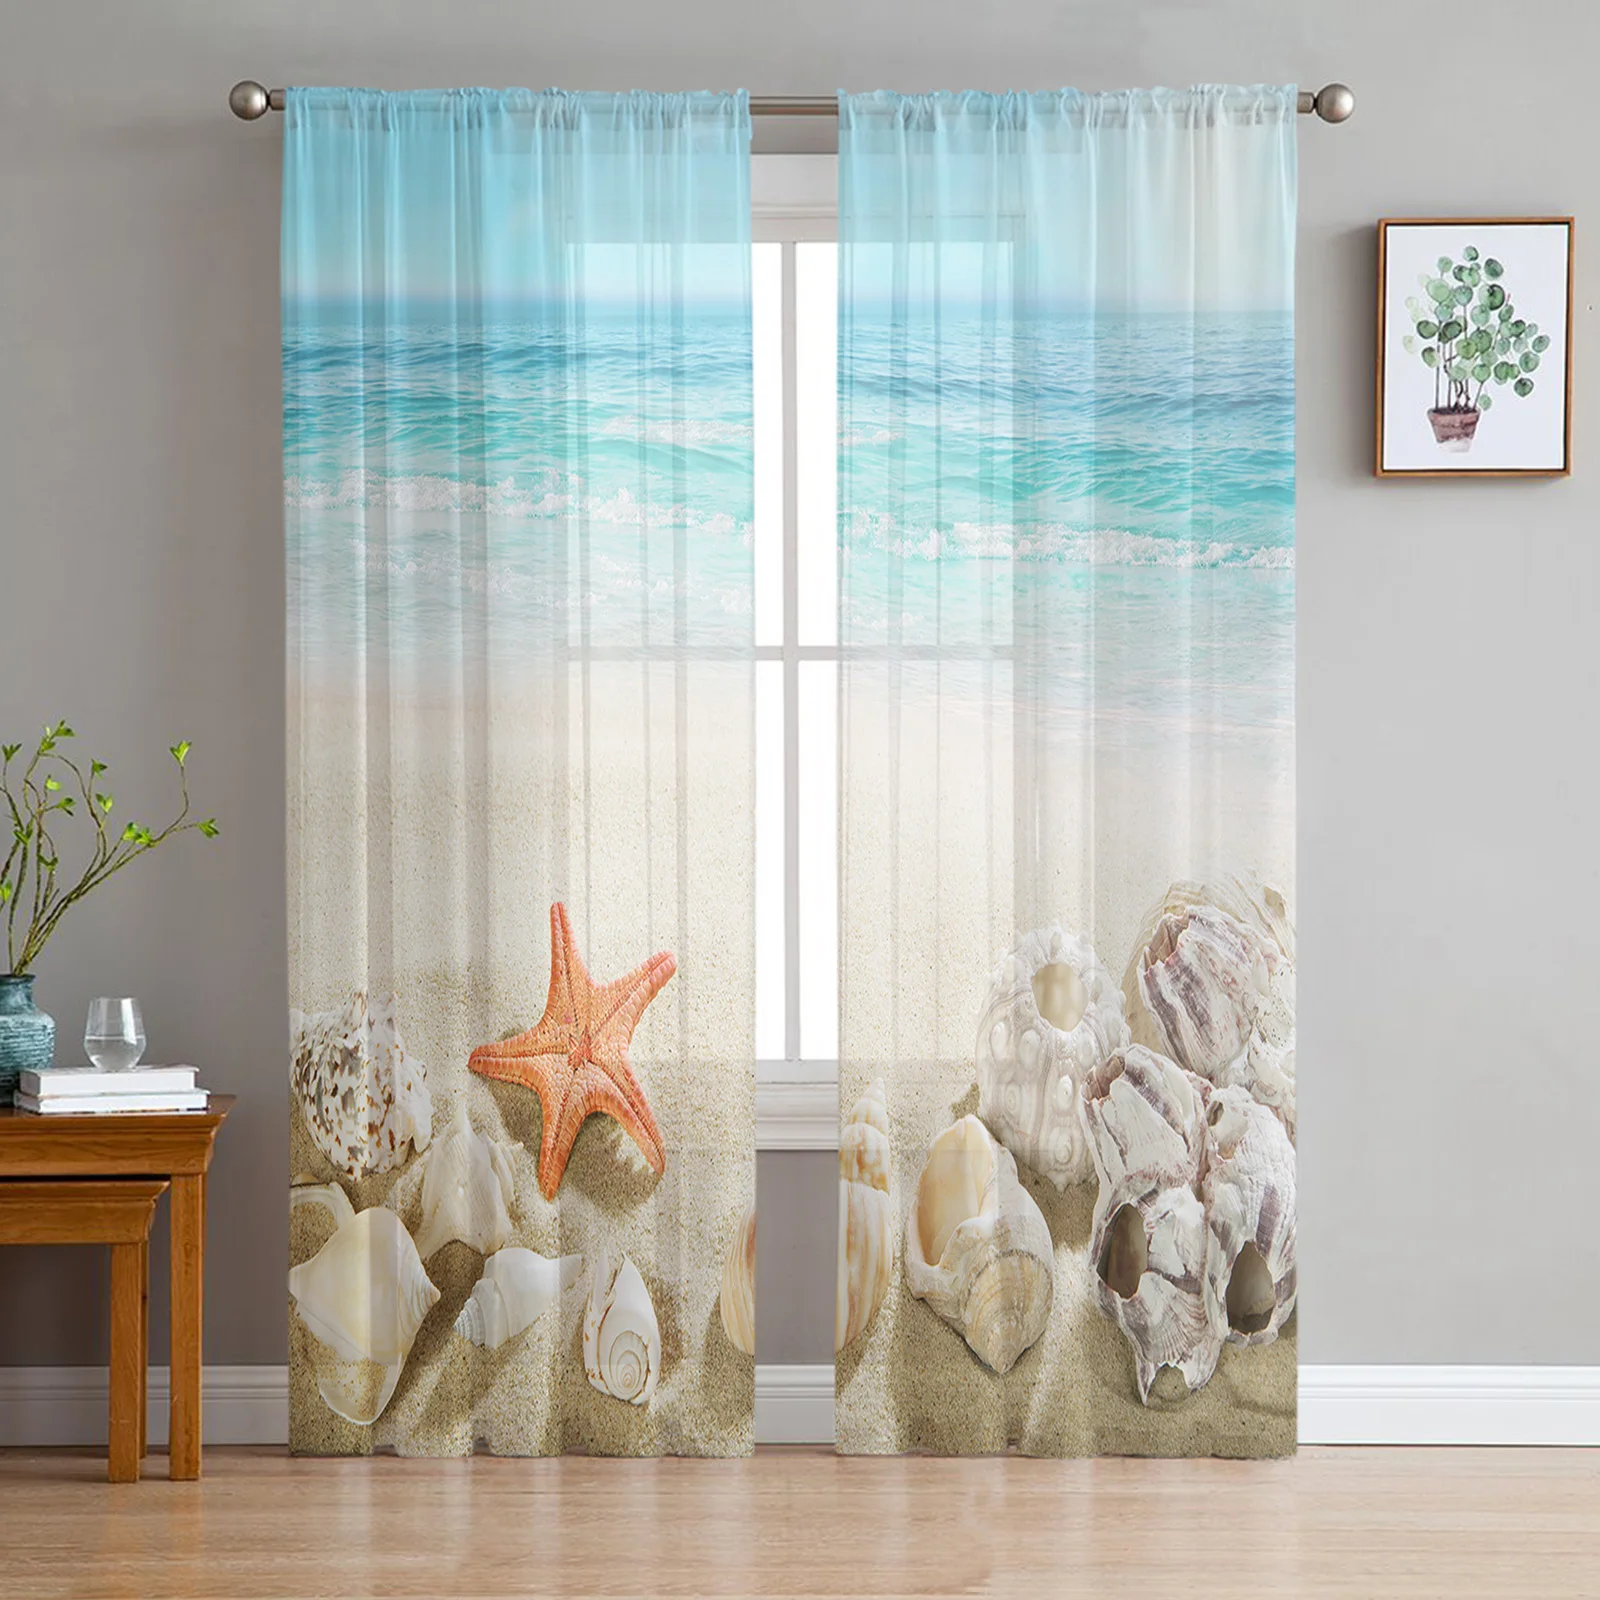 

Marine Starfish Shell Ocean Beach Tulle Sheer Curtains for Living Room Bedroom Kitchen Decoration Voile Organza Window Curtains